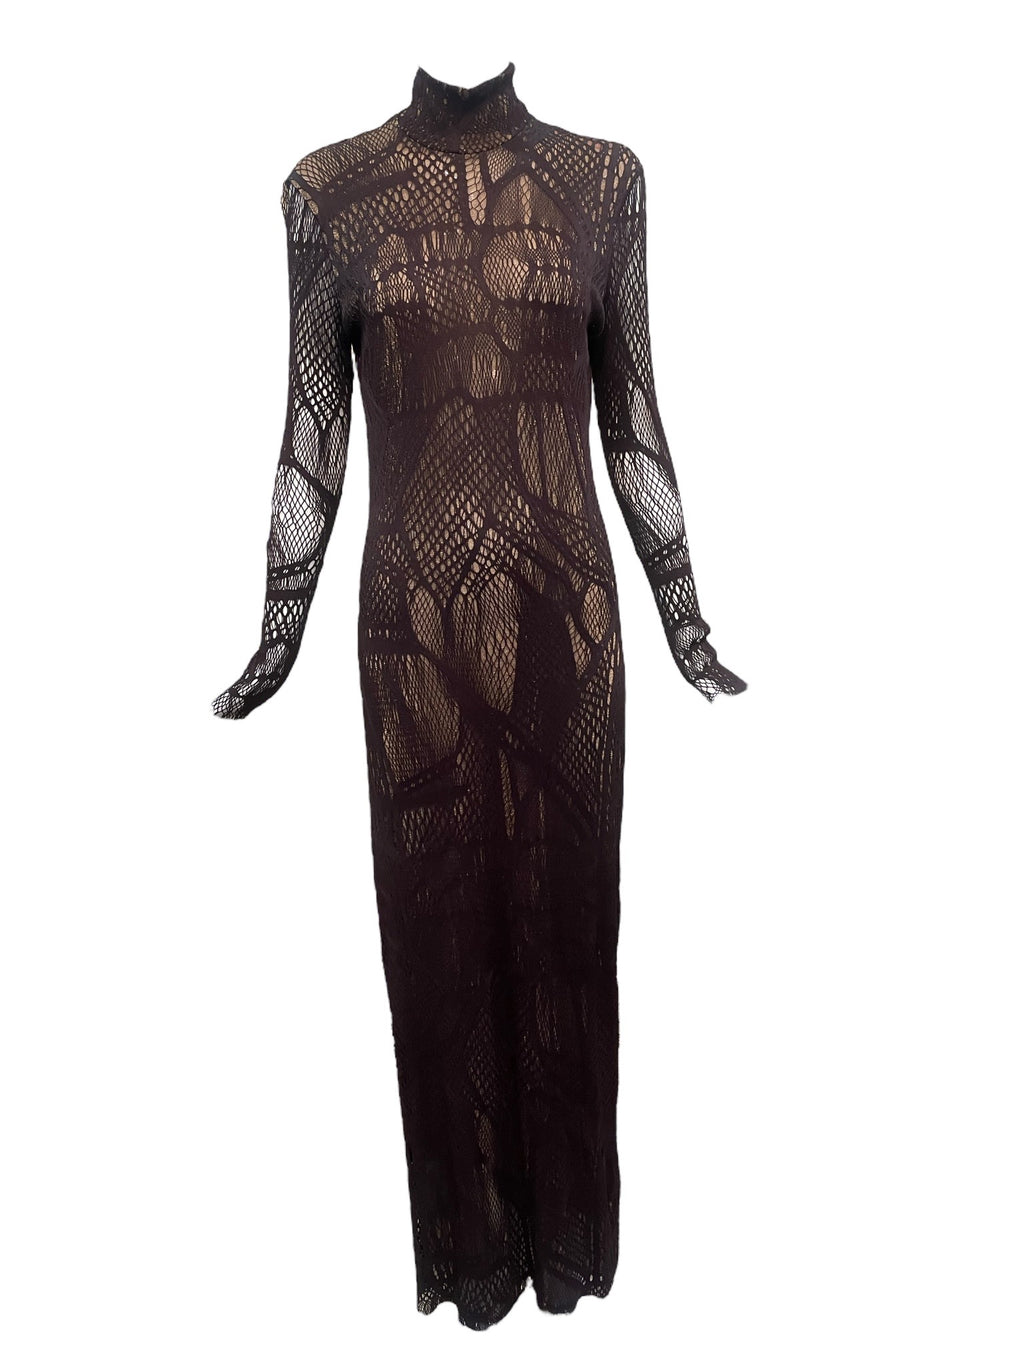 Christian Lacroix 90s Brown Mesh Gown with Cut Outs over Gold Lurex FRONT 1 of 6